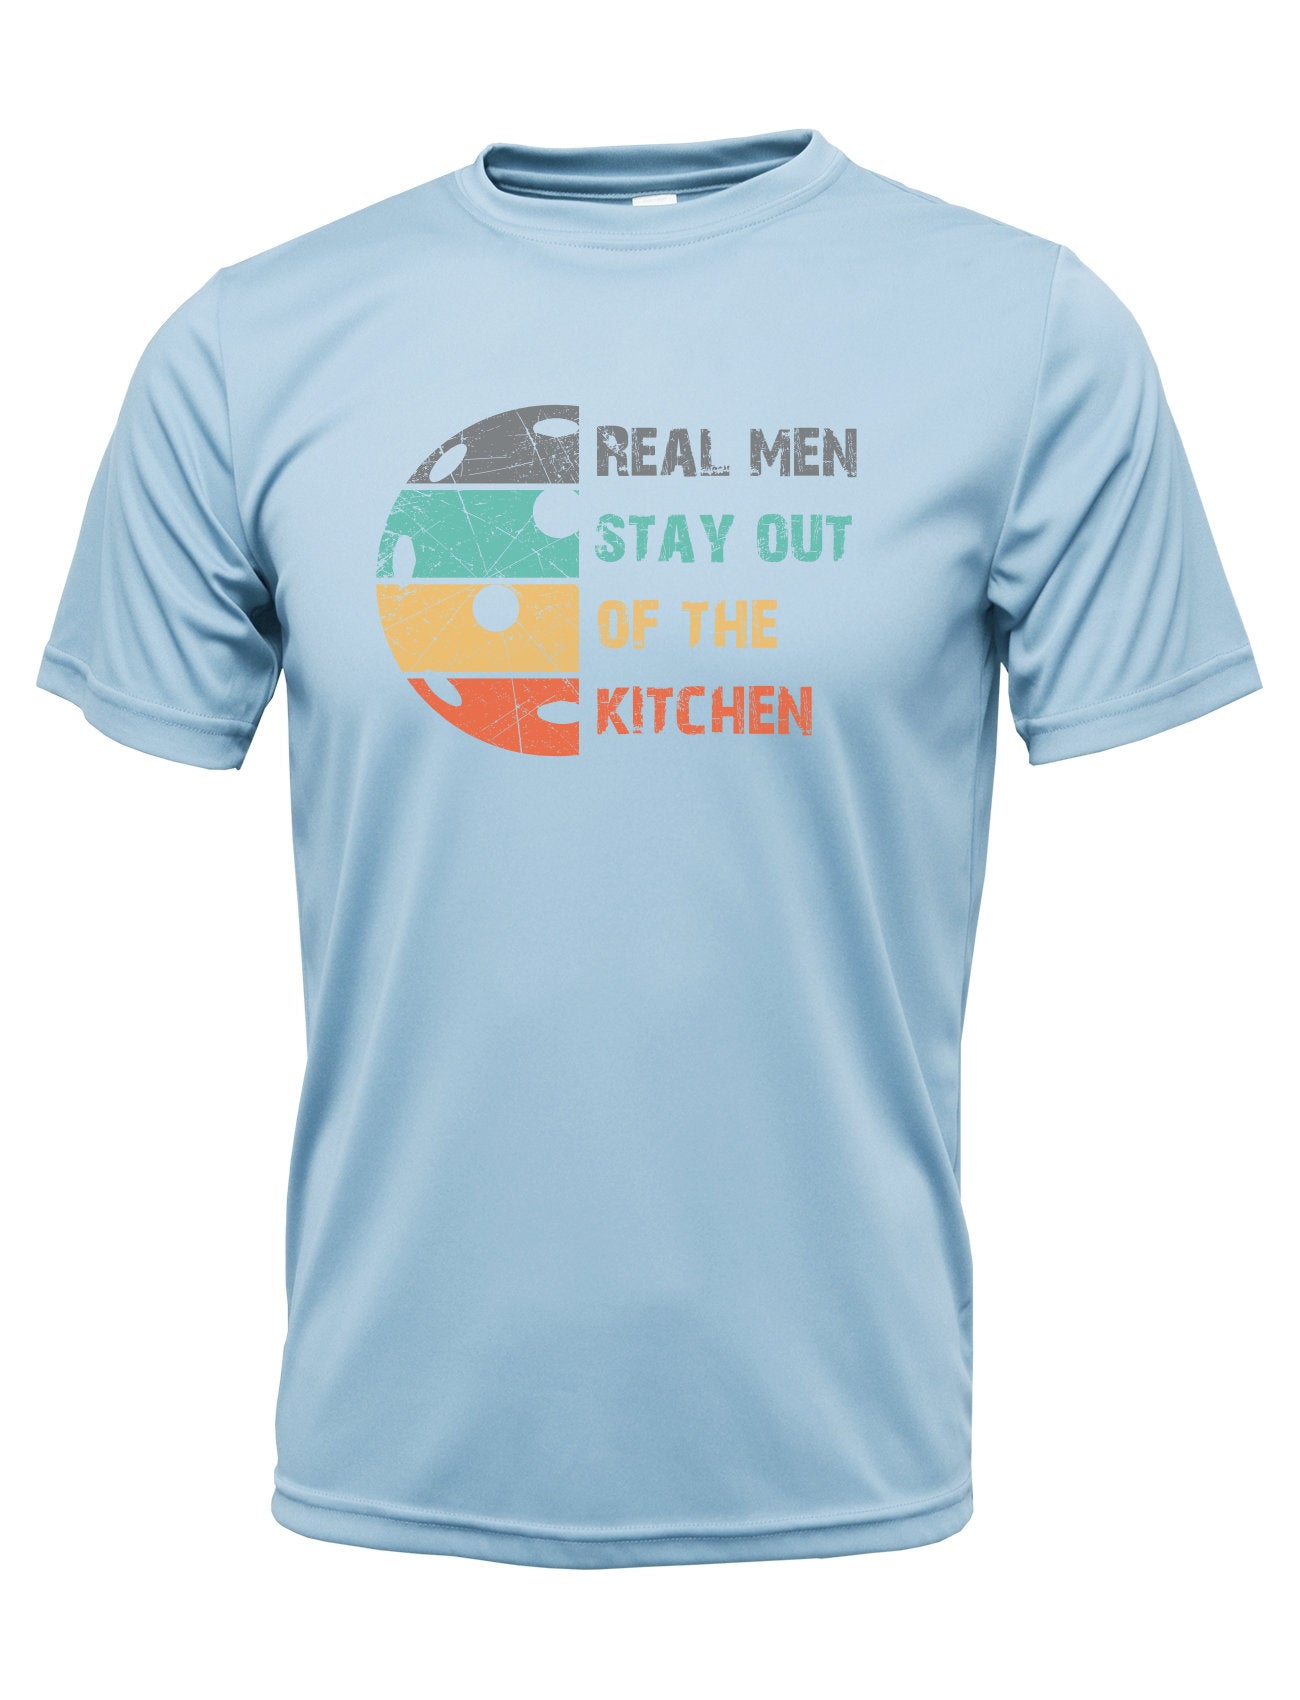 What men really want in the kitchen